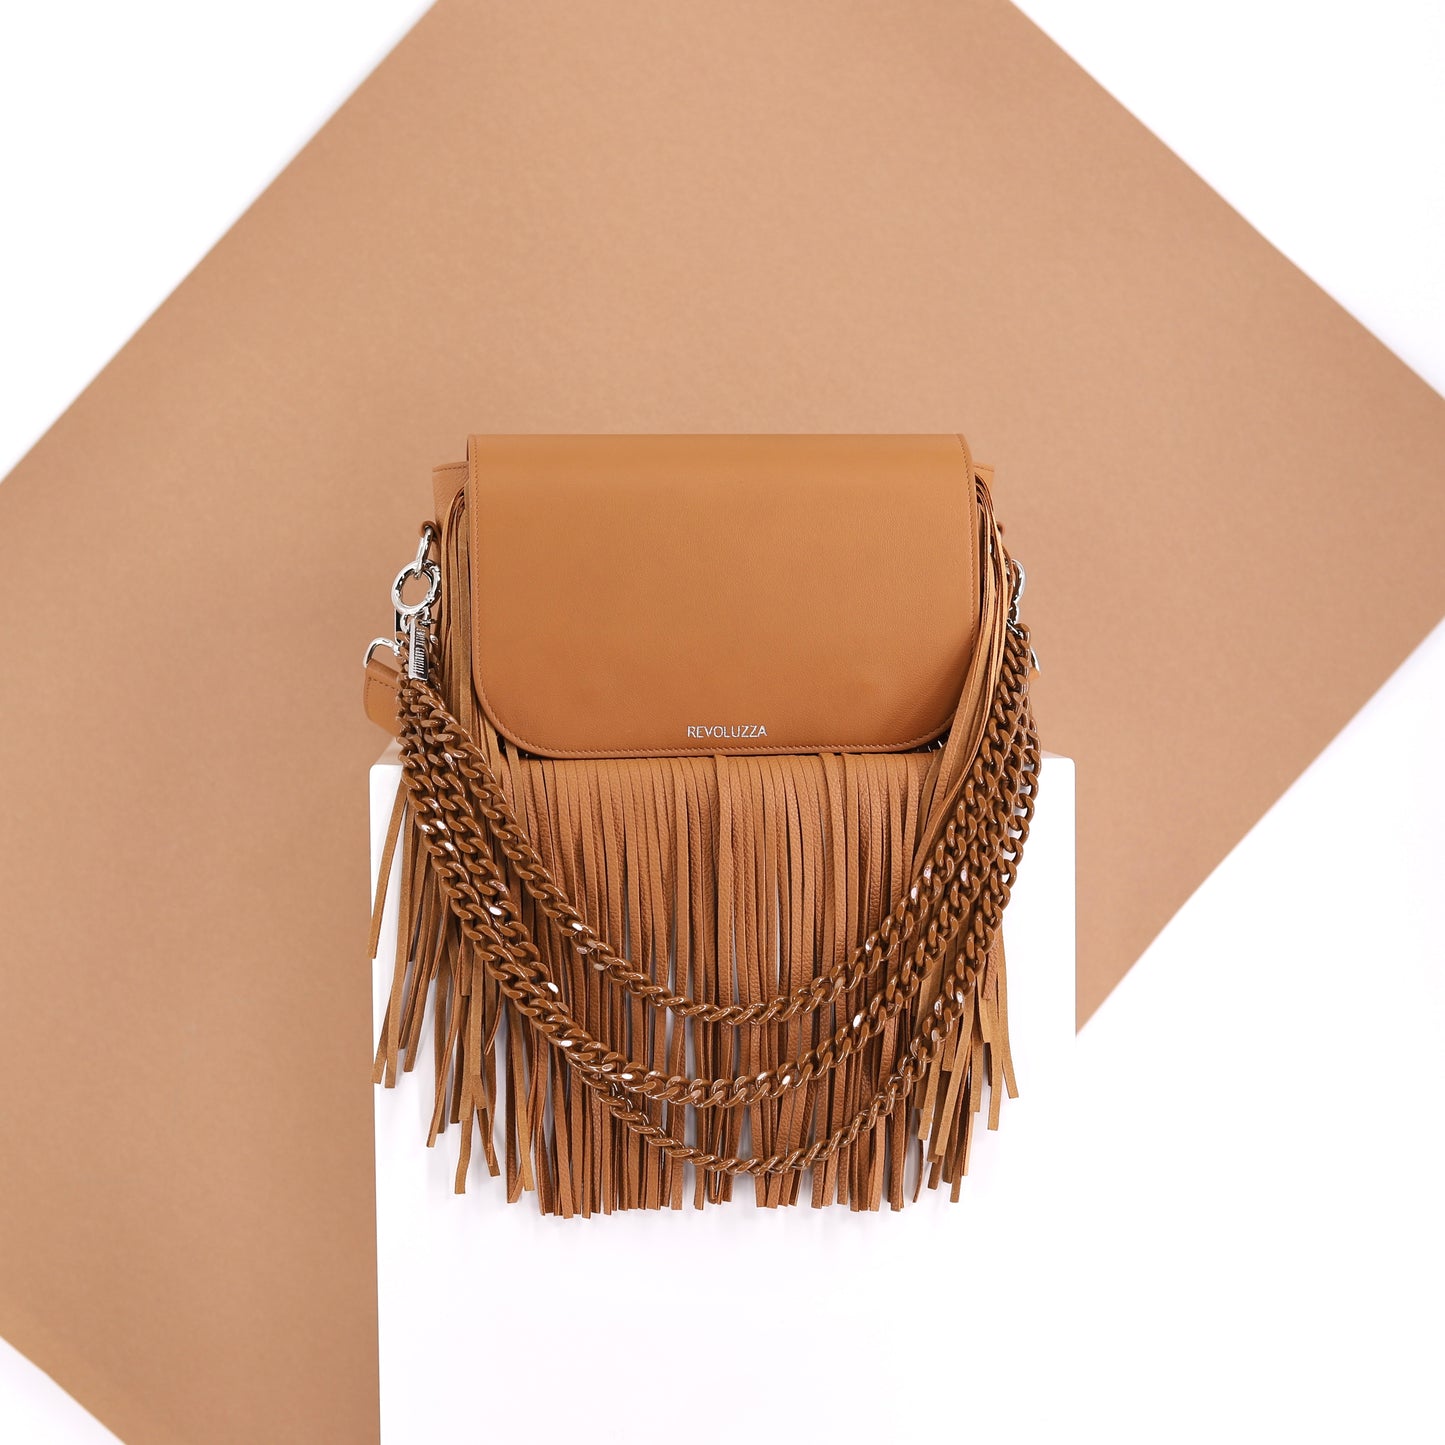 GABRIELLE handbag with fringes genuine leather caramel small